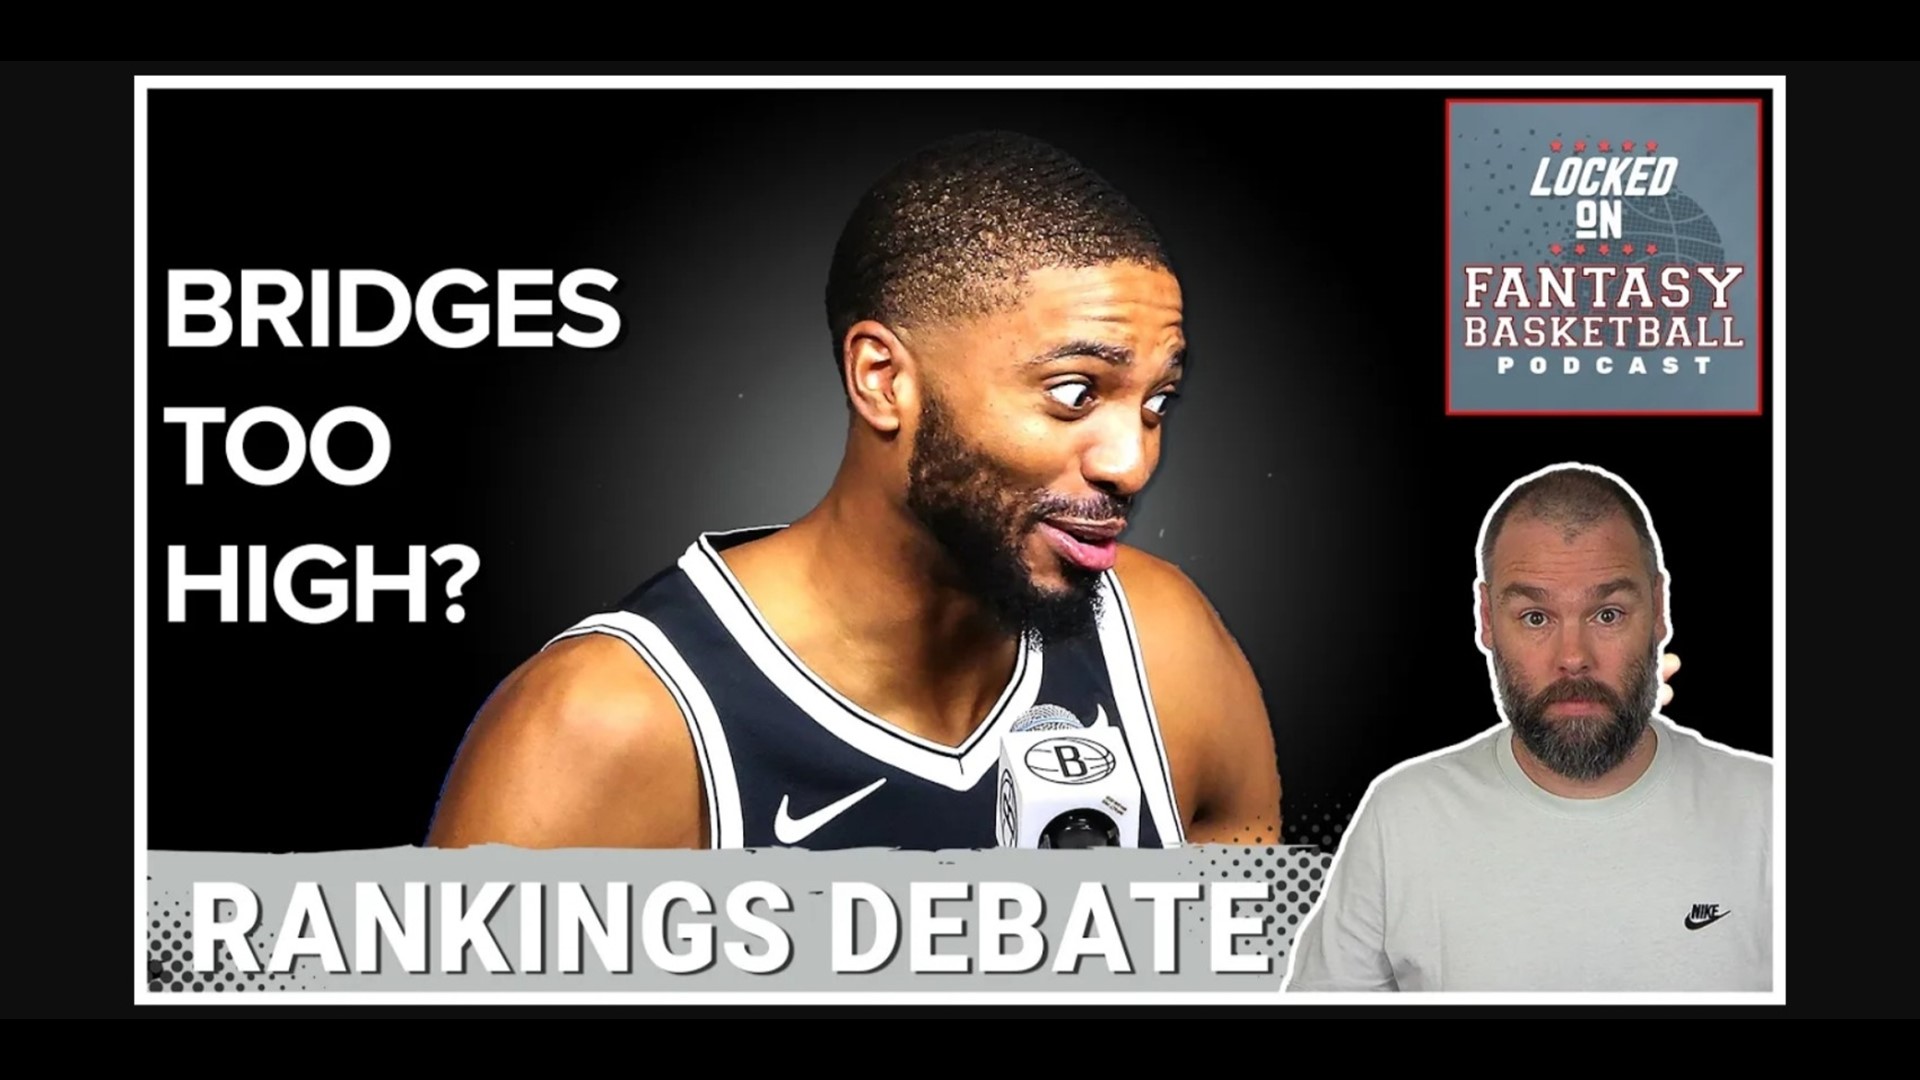 Join Josh Lloyd and Stan Son for a unique twist on fantasy basketball rankings. This episode promises hard-hitting debates on players like Mikal Bridges.